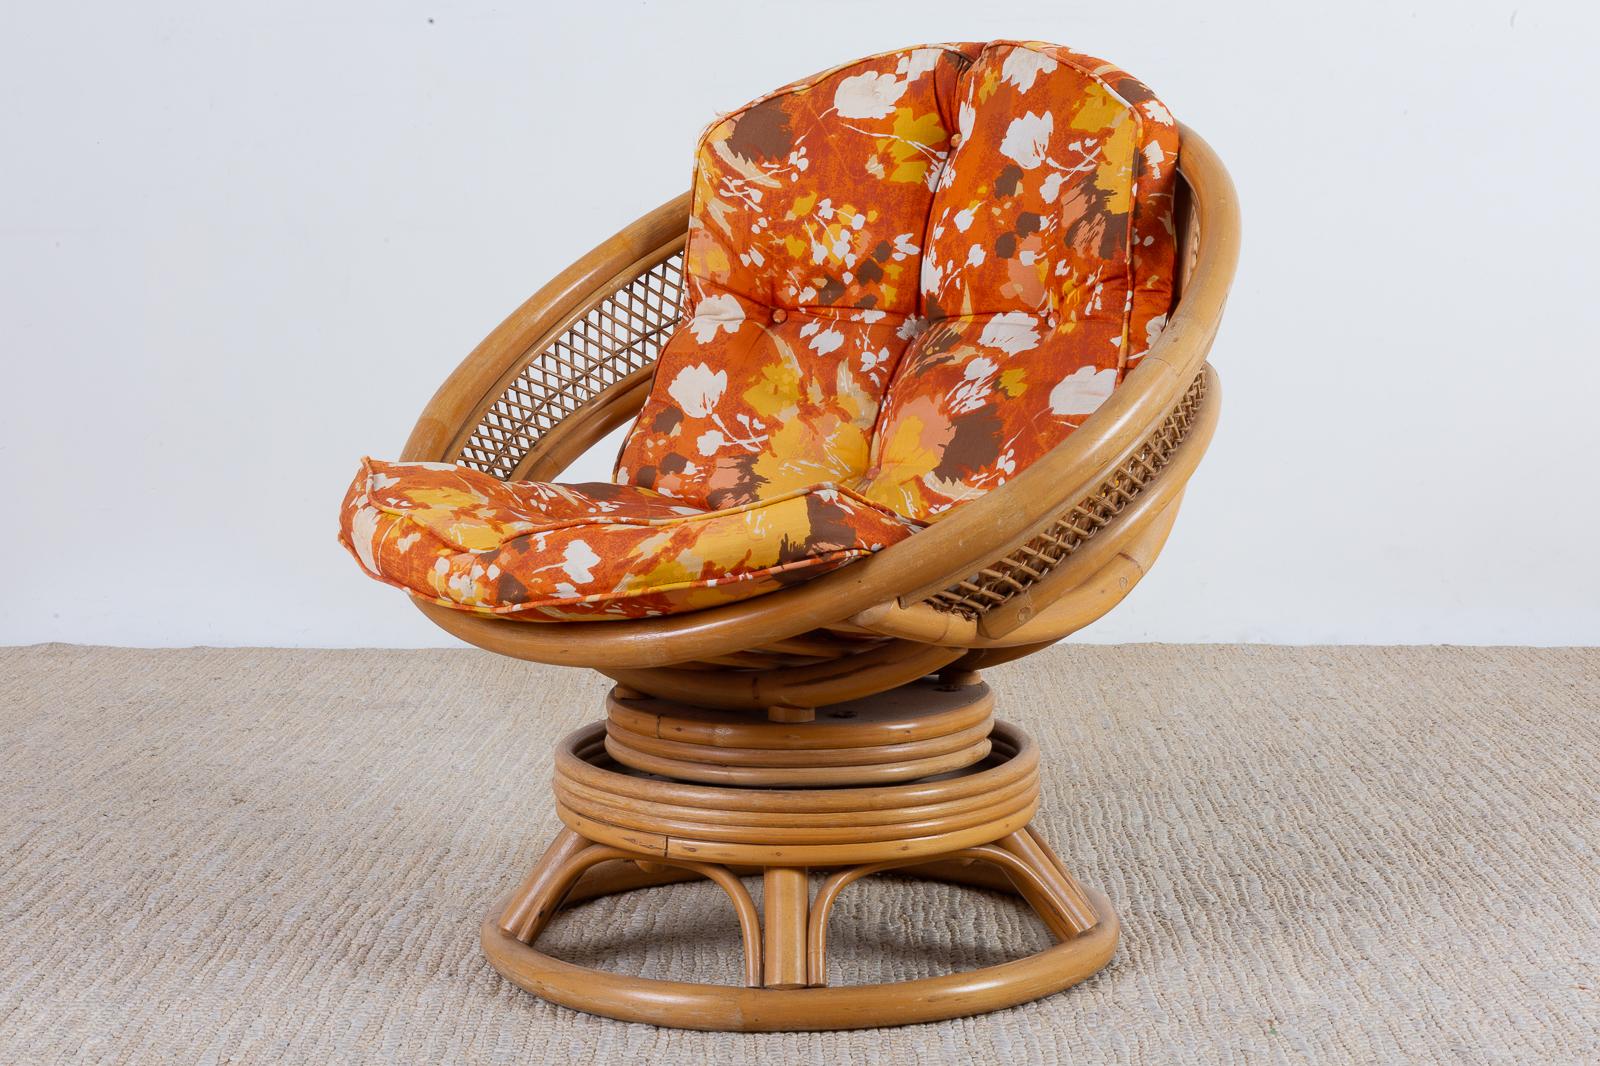 Unique Mid-Century Modern bamboo rattan swivel lounge chair. Features a round seat and base made of steam bent rattan. The sides are decorated with an open fretwork design with an open fretwork design the chair also has a rocking mechanism.